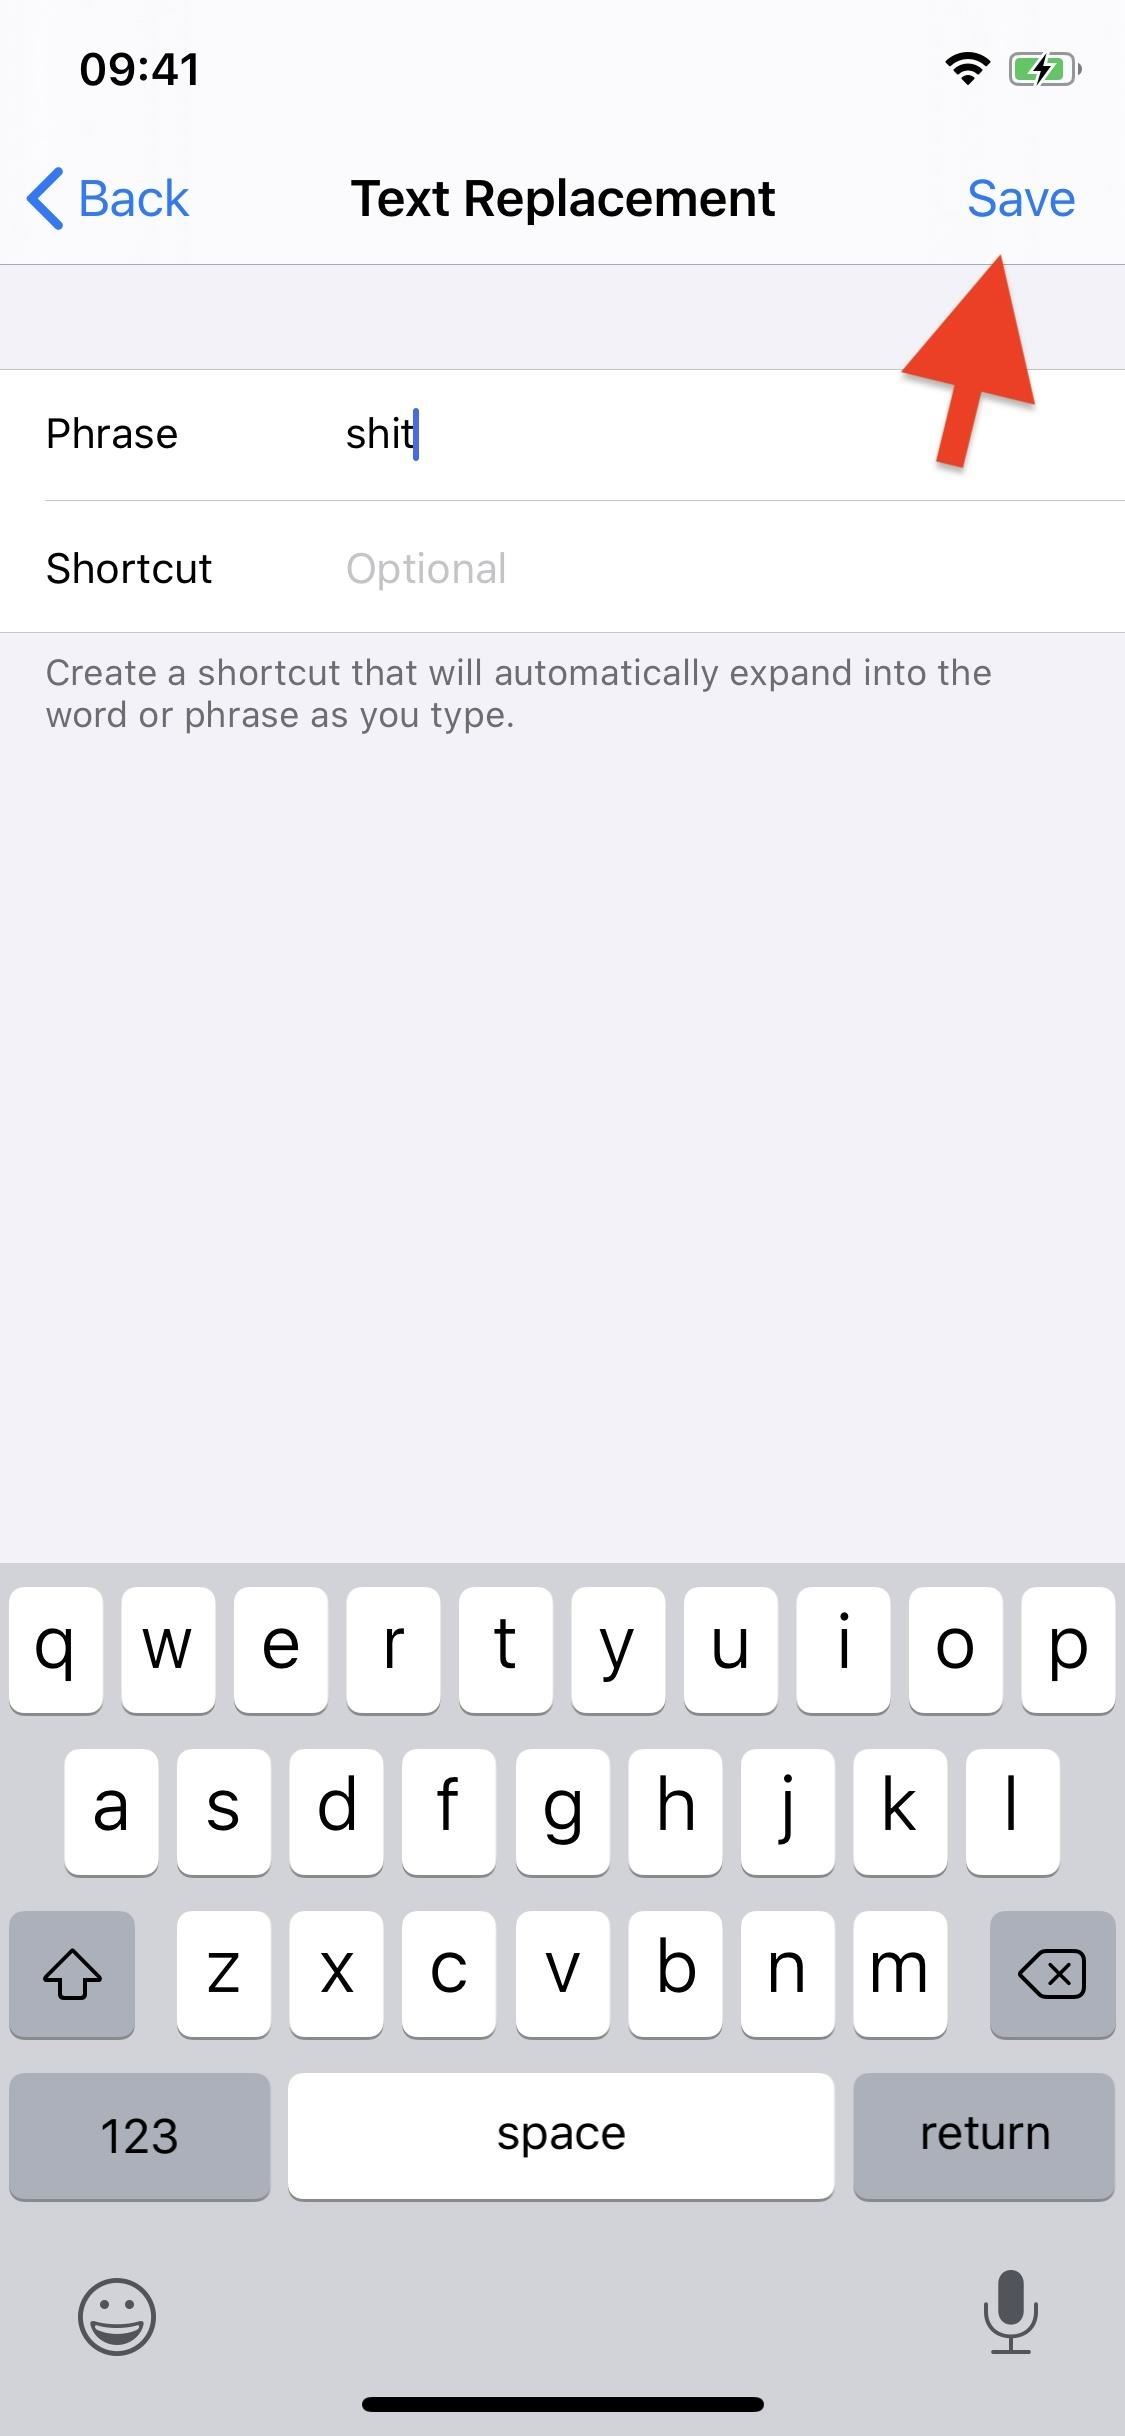 How to Type Curse Words with Apple's QuickPath Swipe-Typing Keyboard in iOS 13